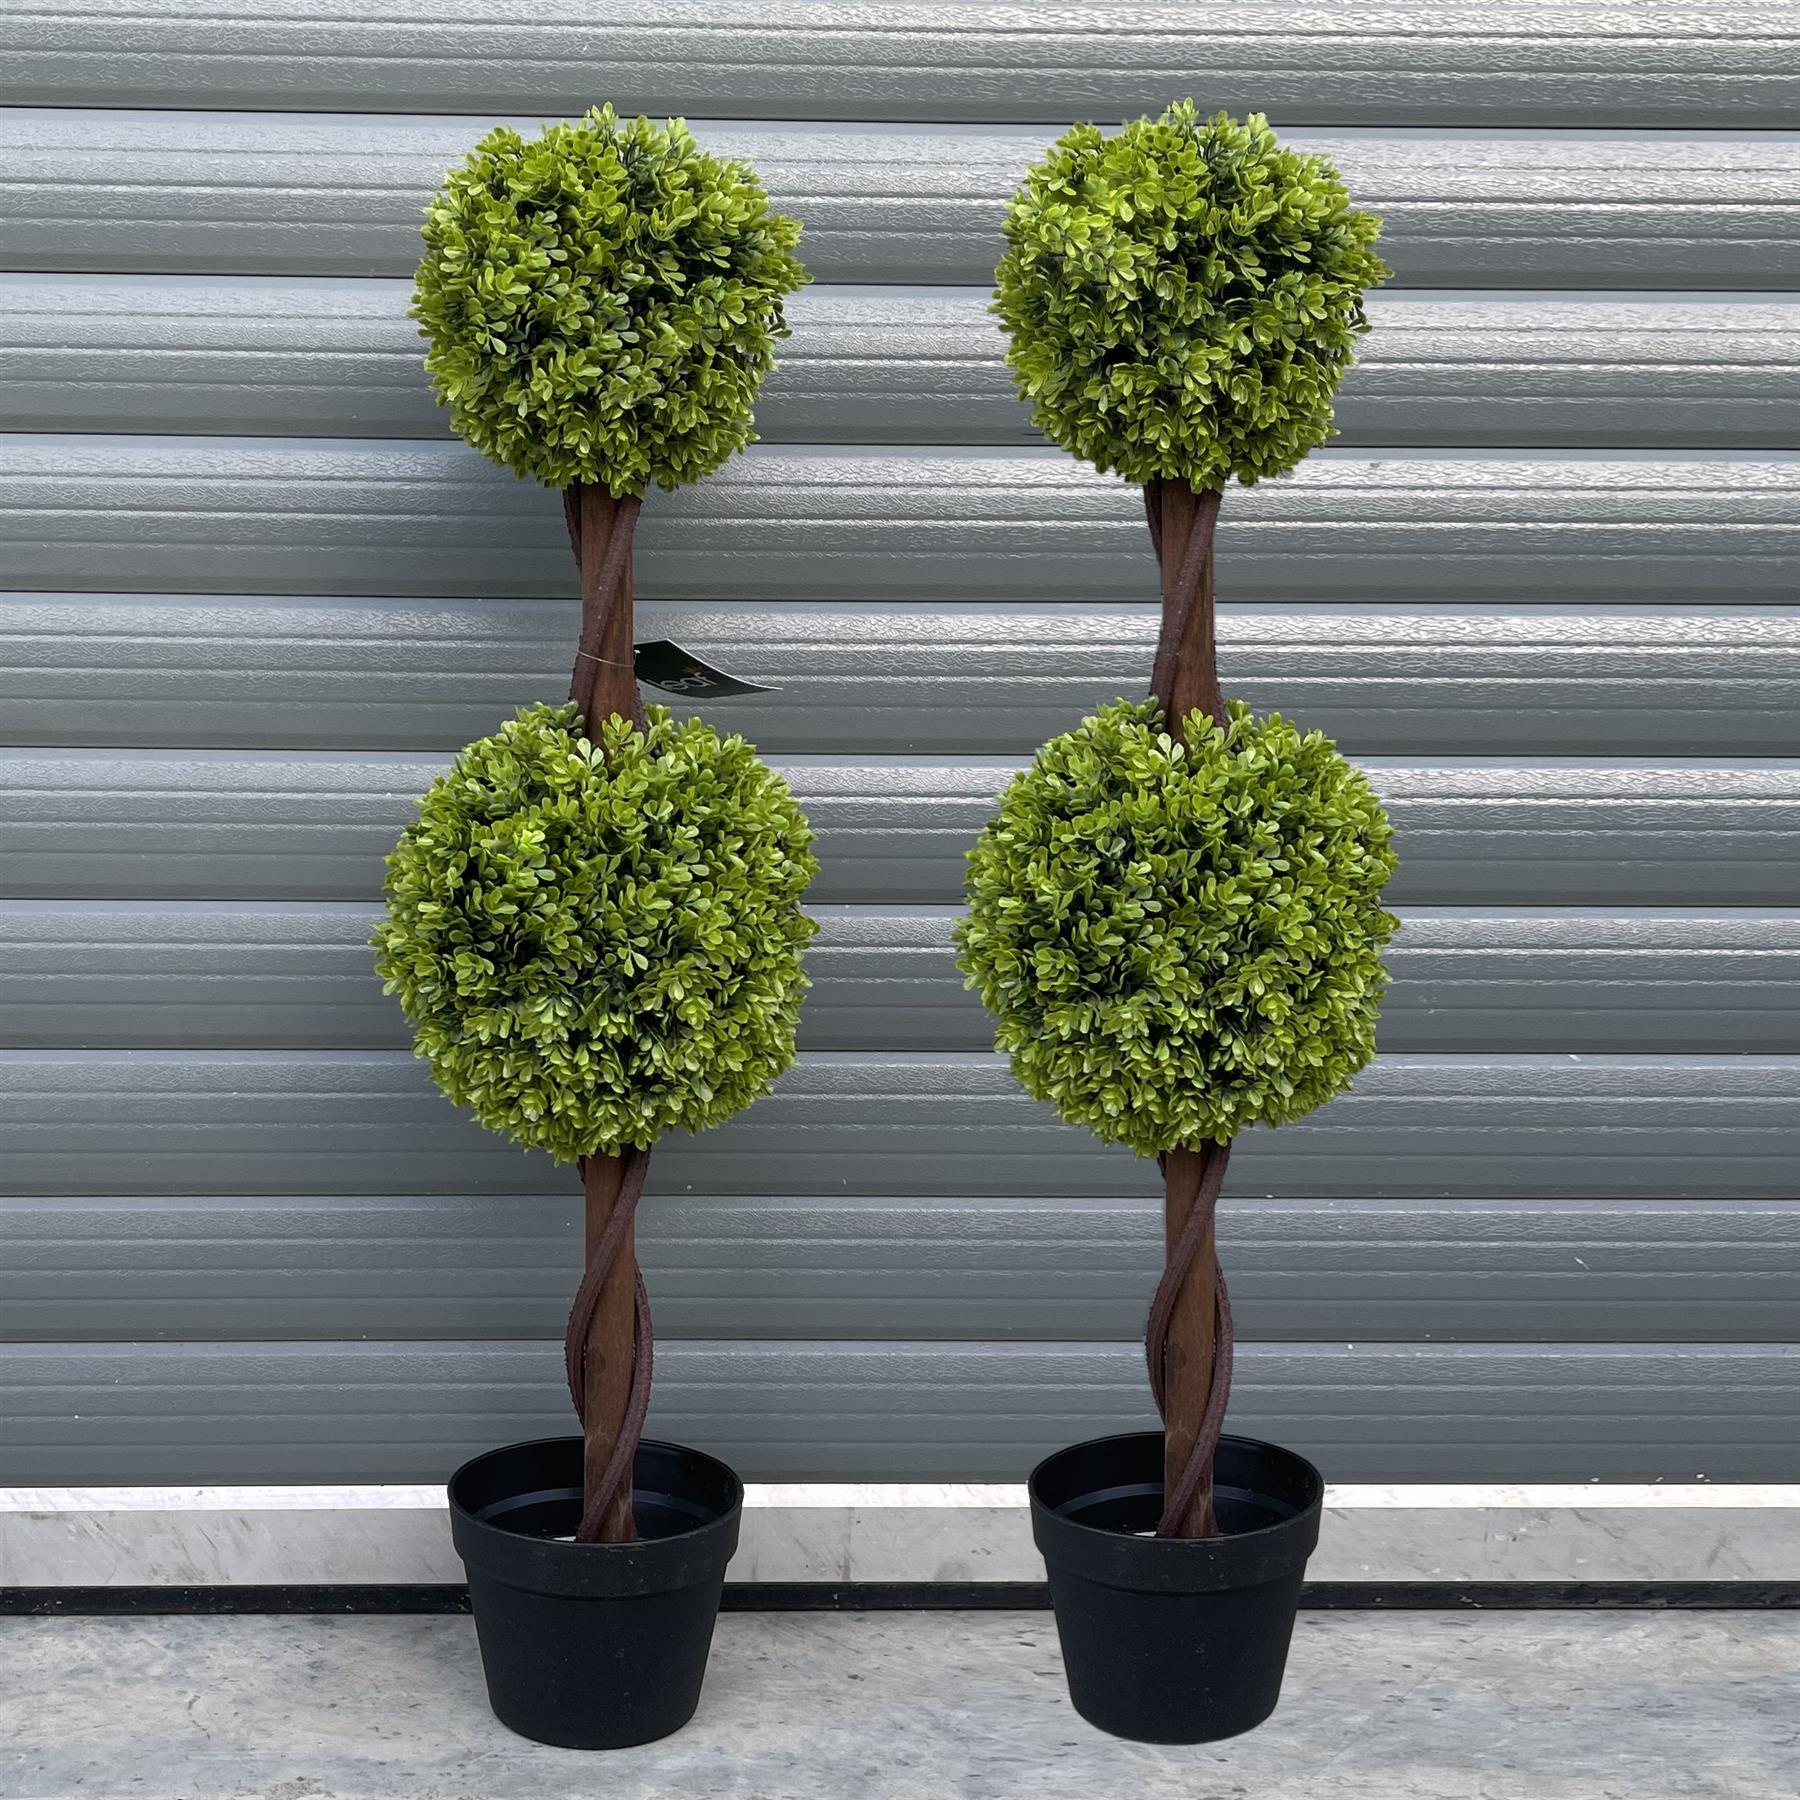 90cm Pair of Green Double Ball Topiary Trees